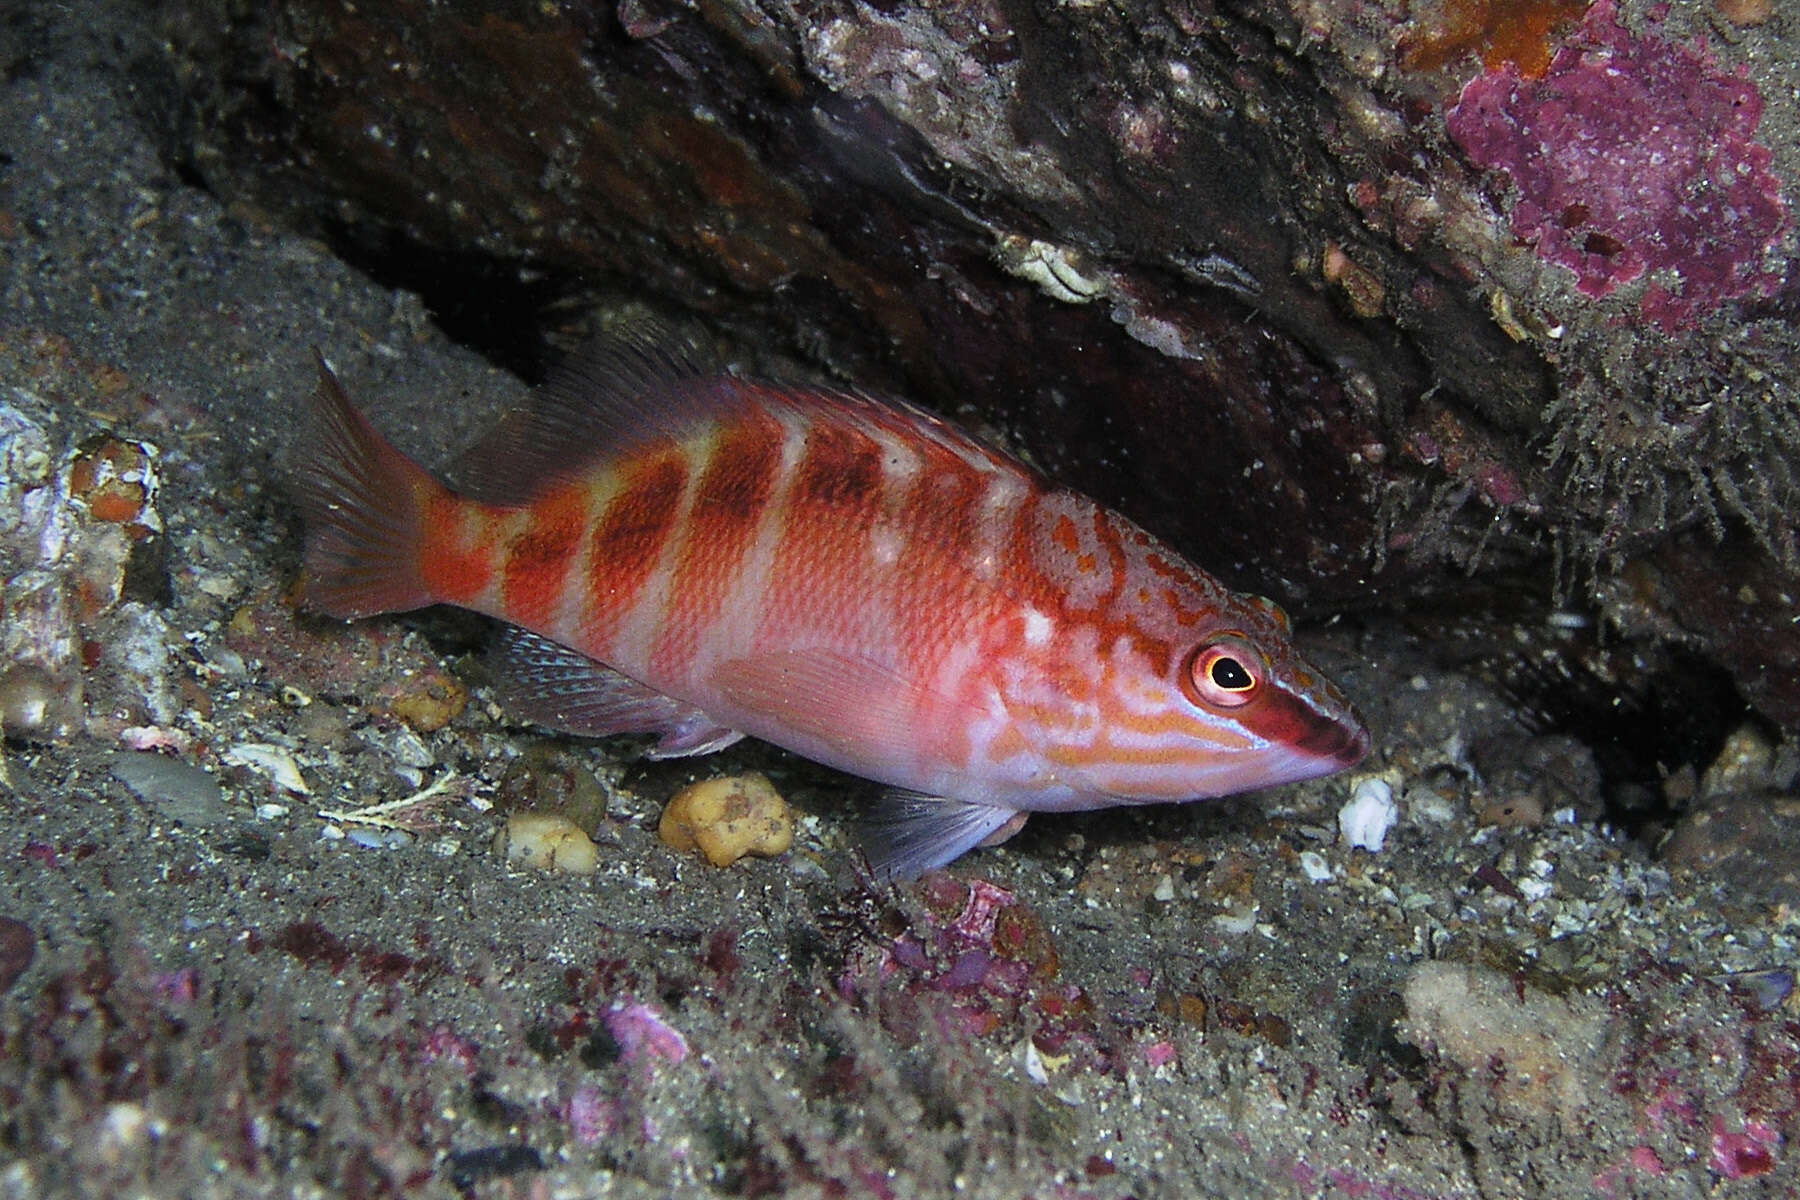 Image of Half-banded seaperch